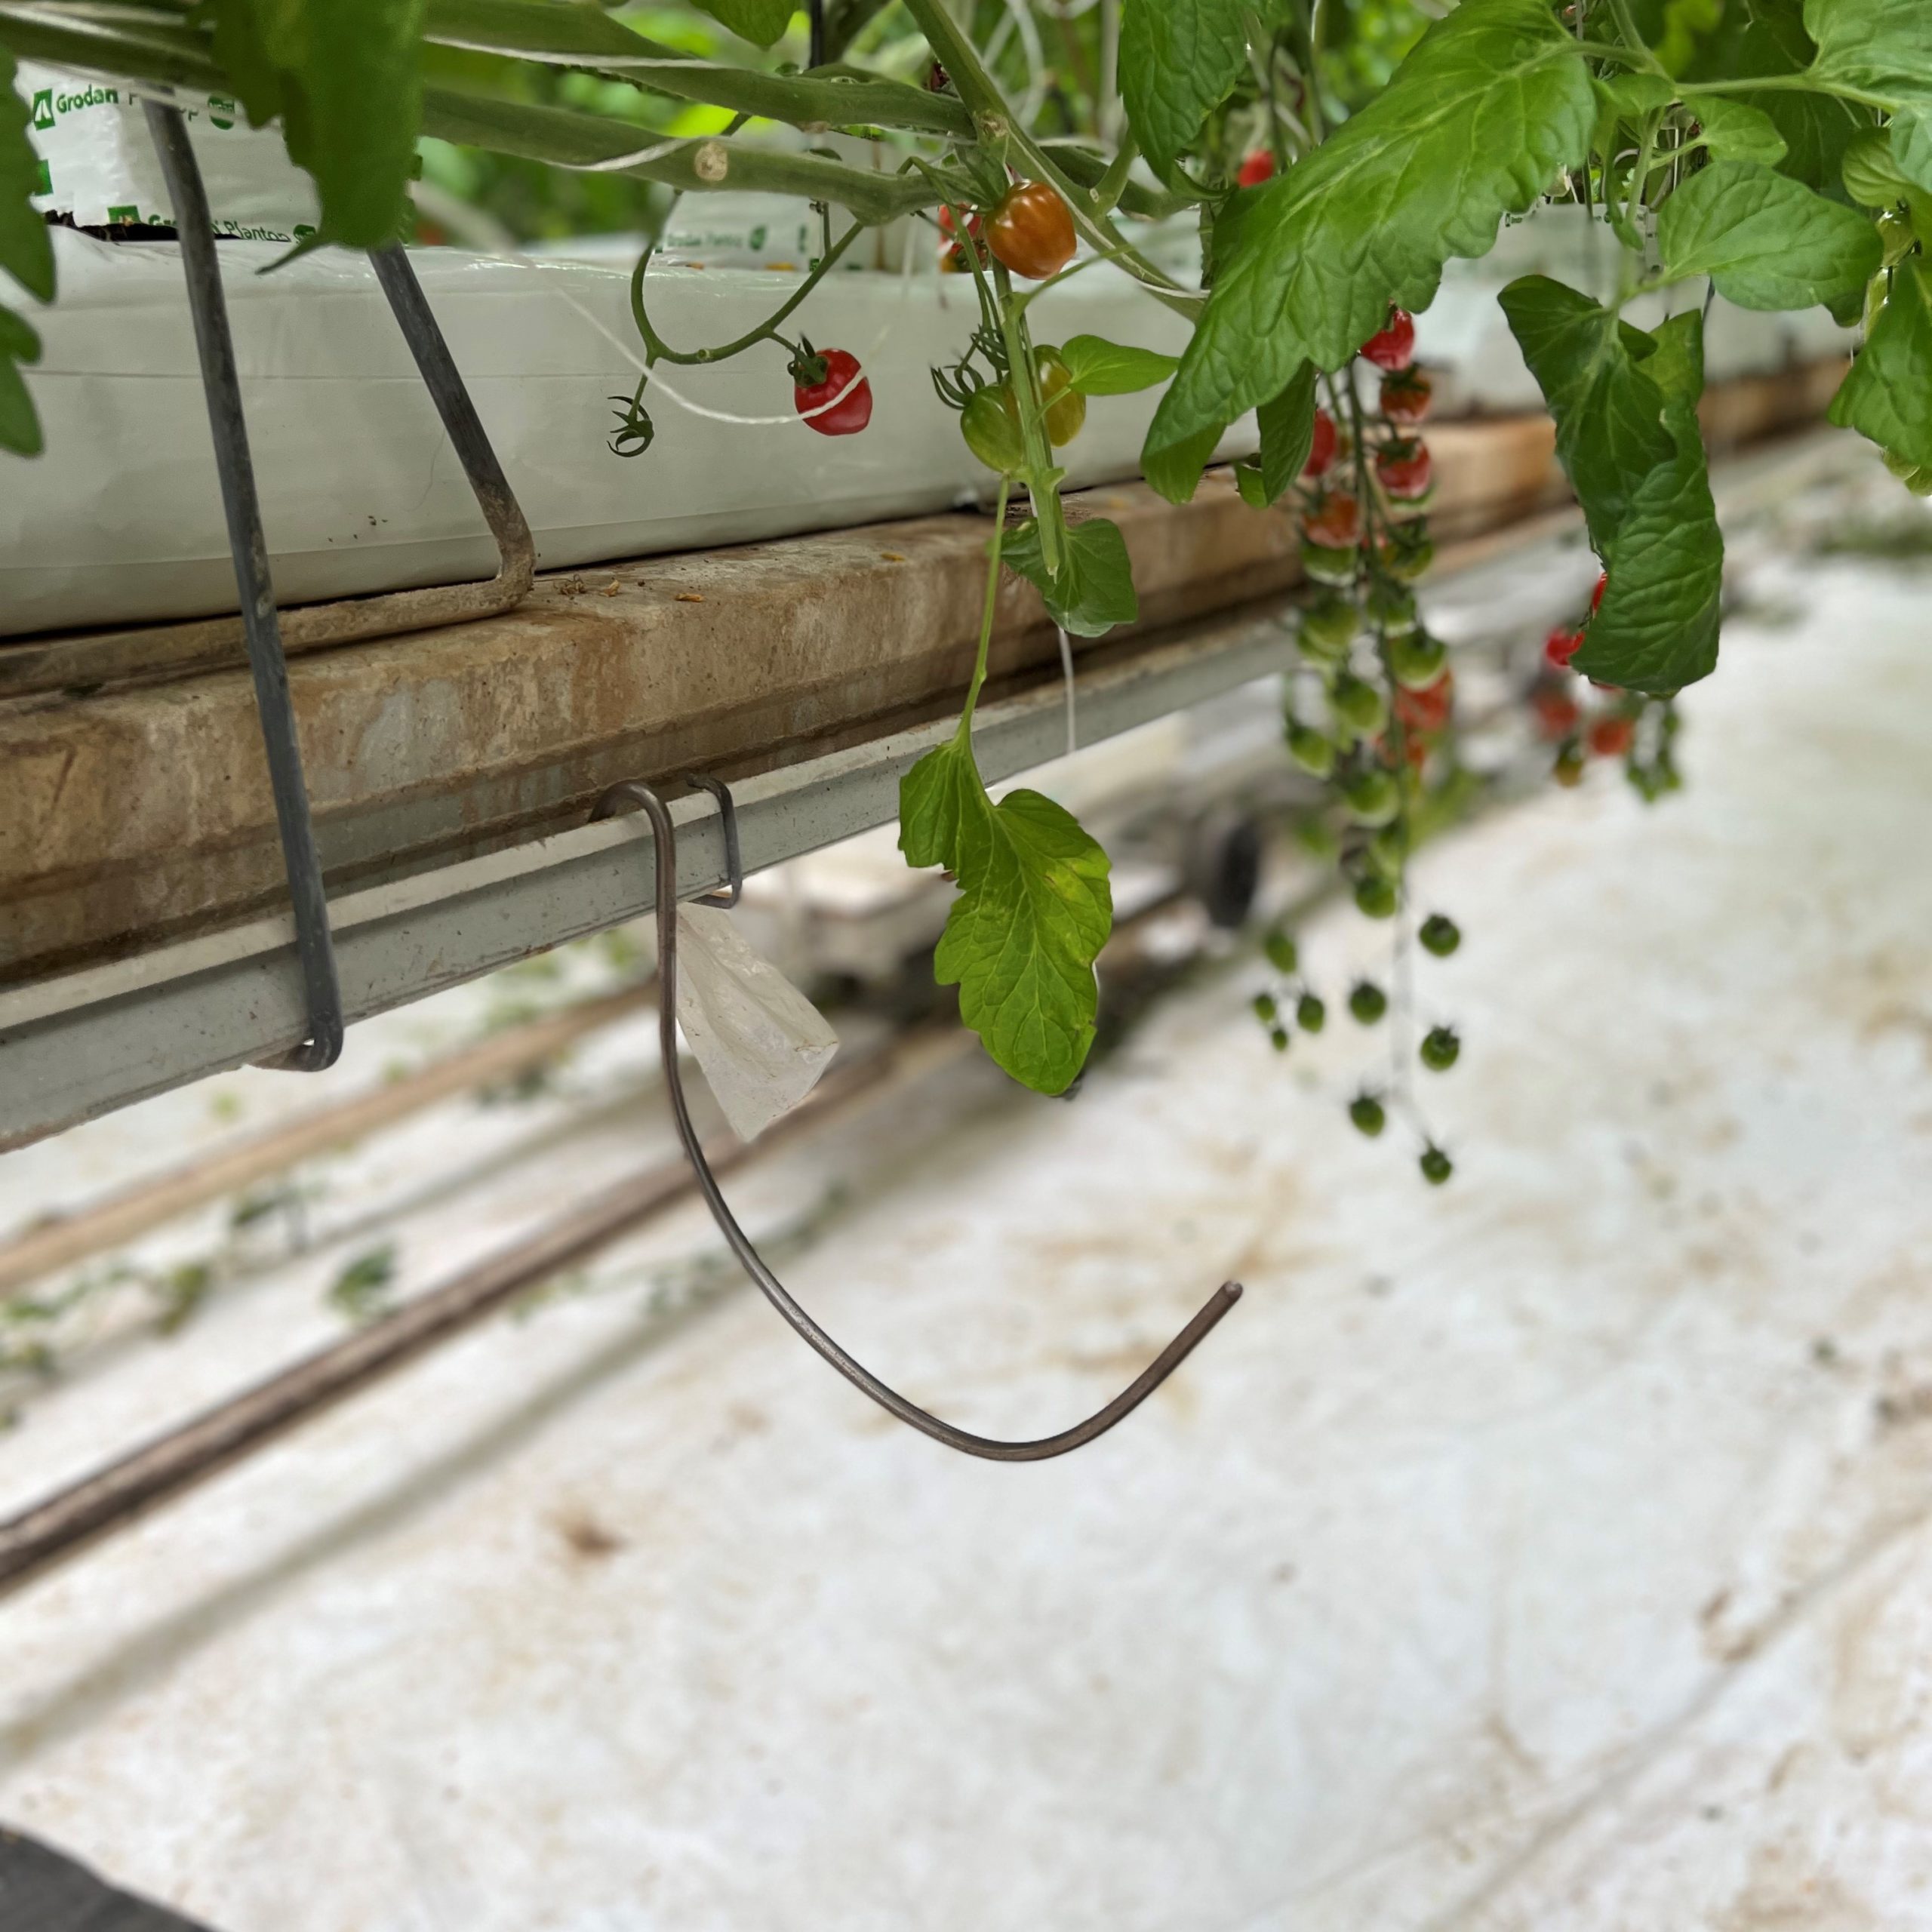 SunTech Greenhouse's hook system to keep the vines off of the floor 